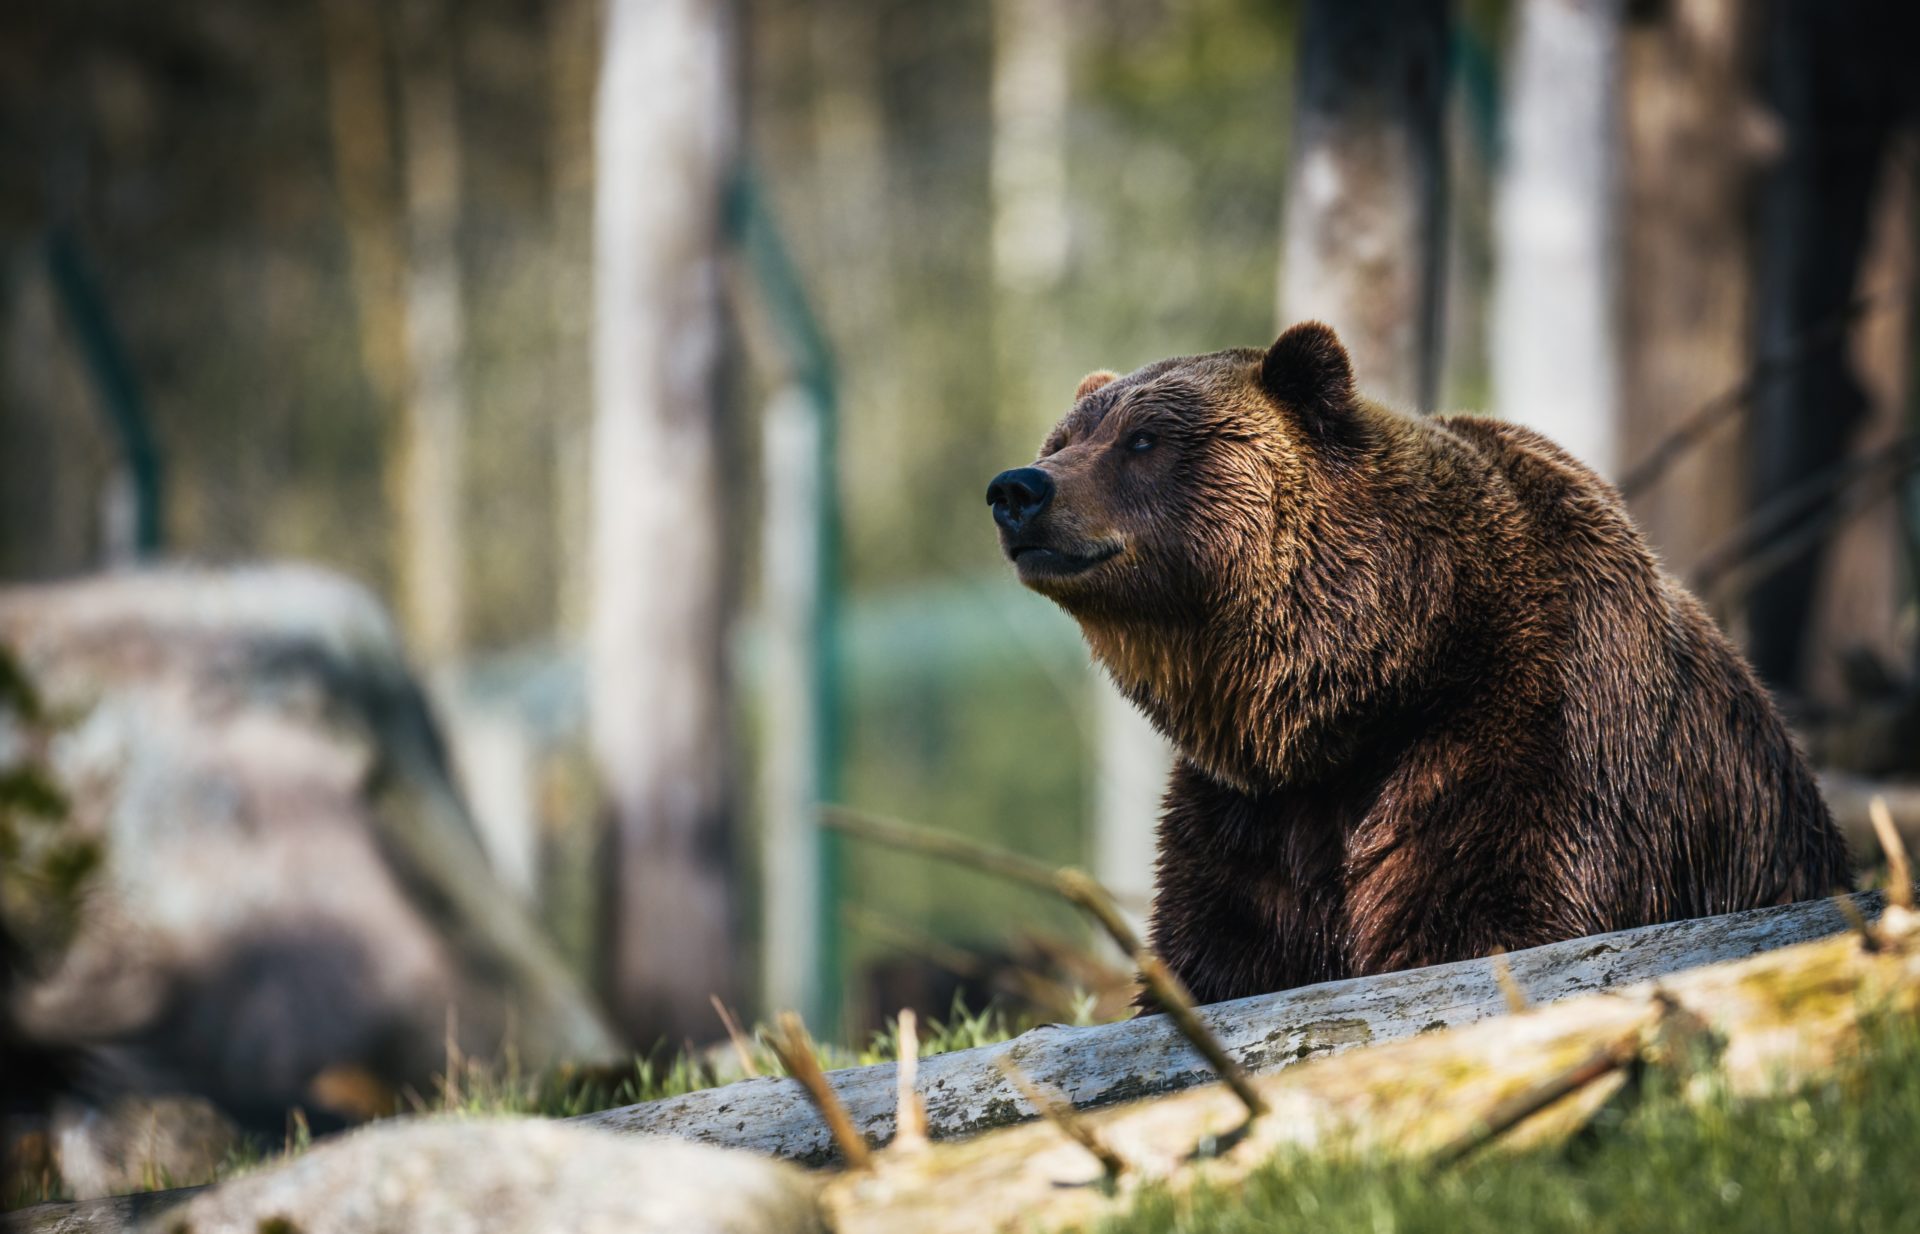 Prominent Investor: This Bitcoin Bear Season May Last For A While 14